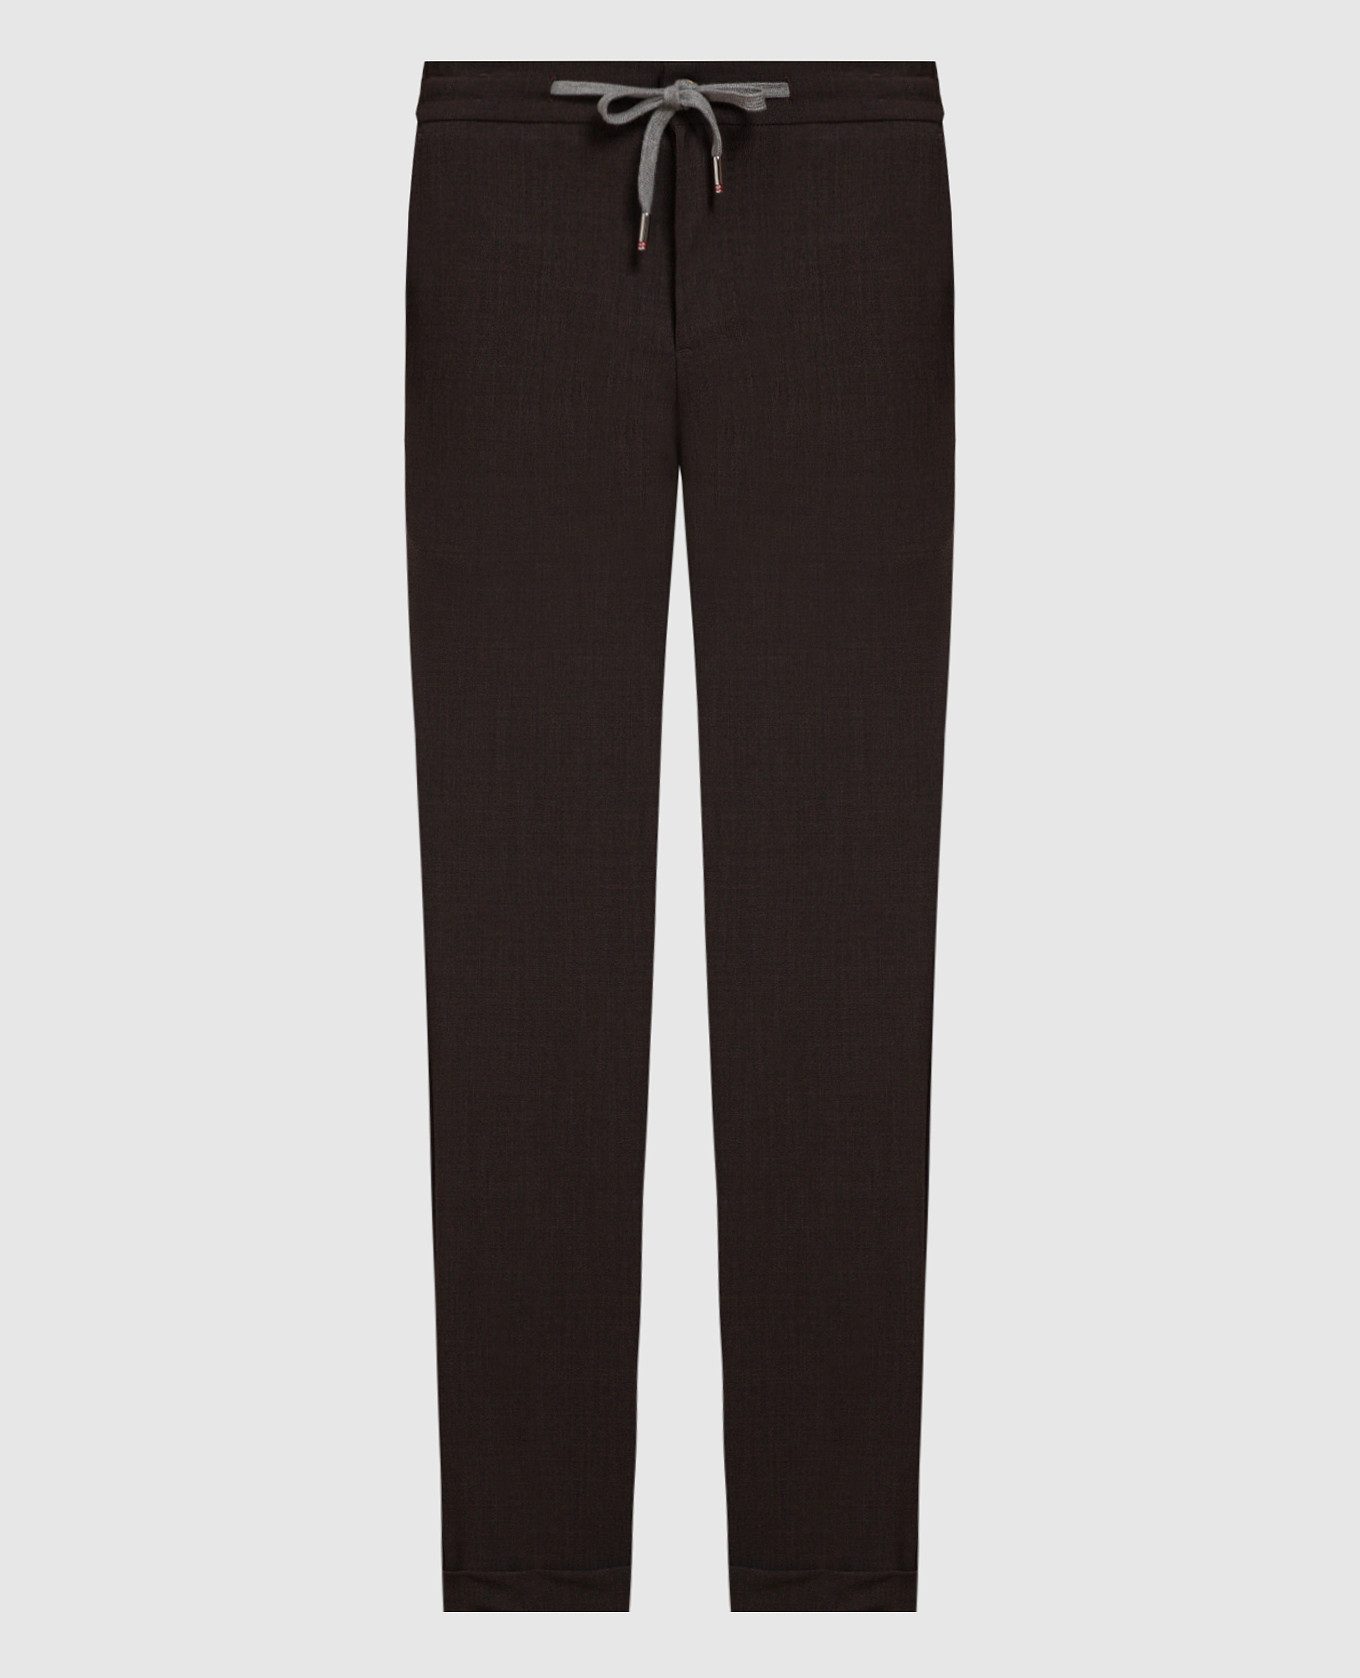 CARACCIOLO brown wool trousers